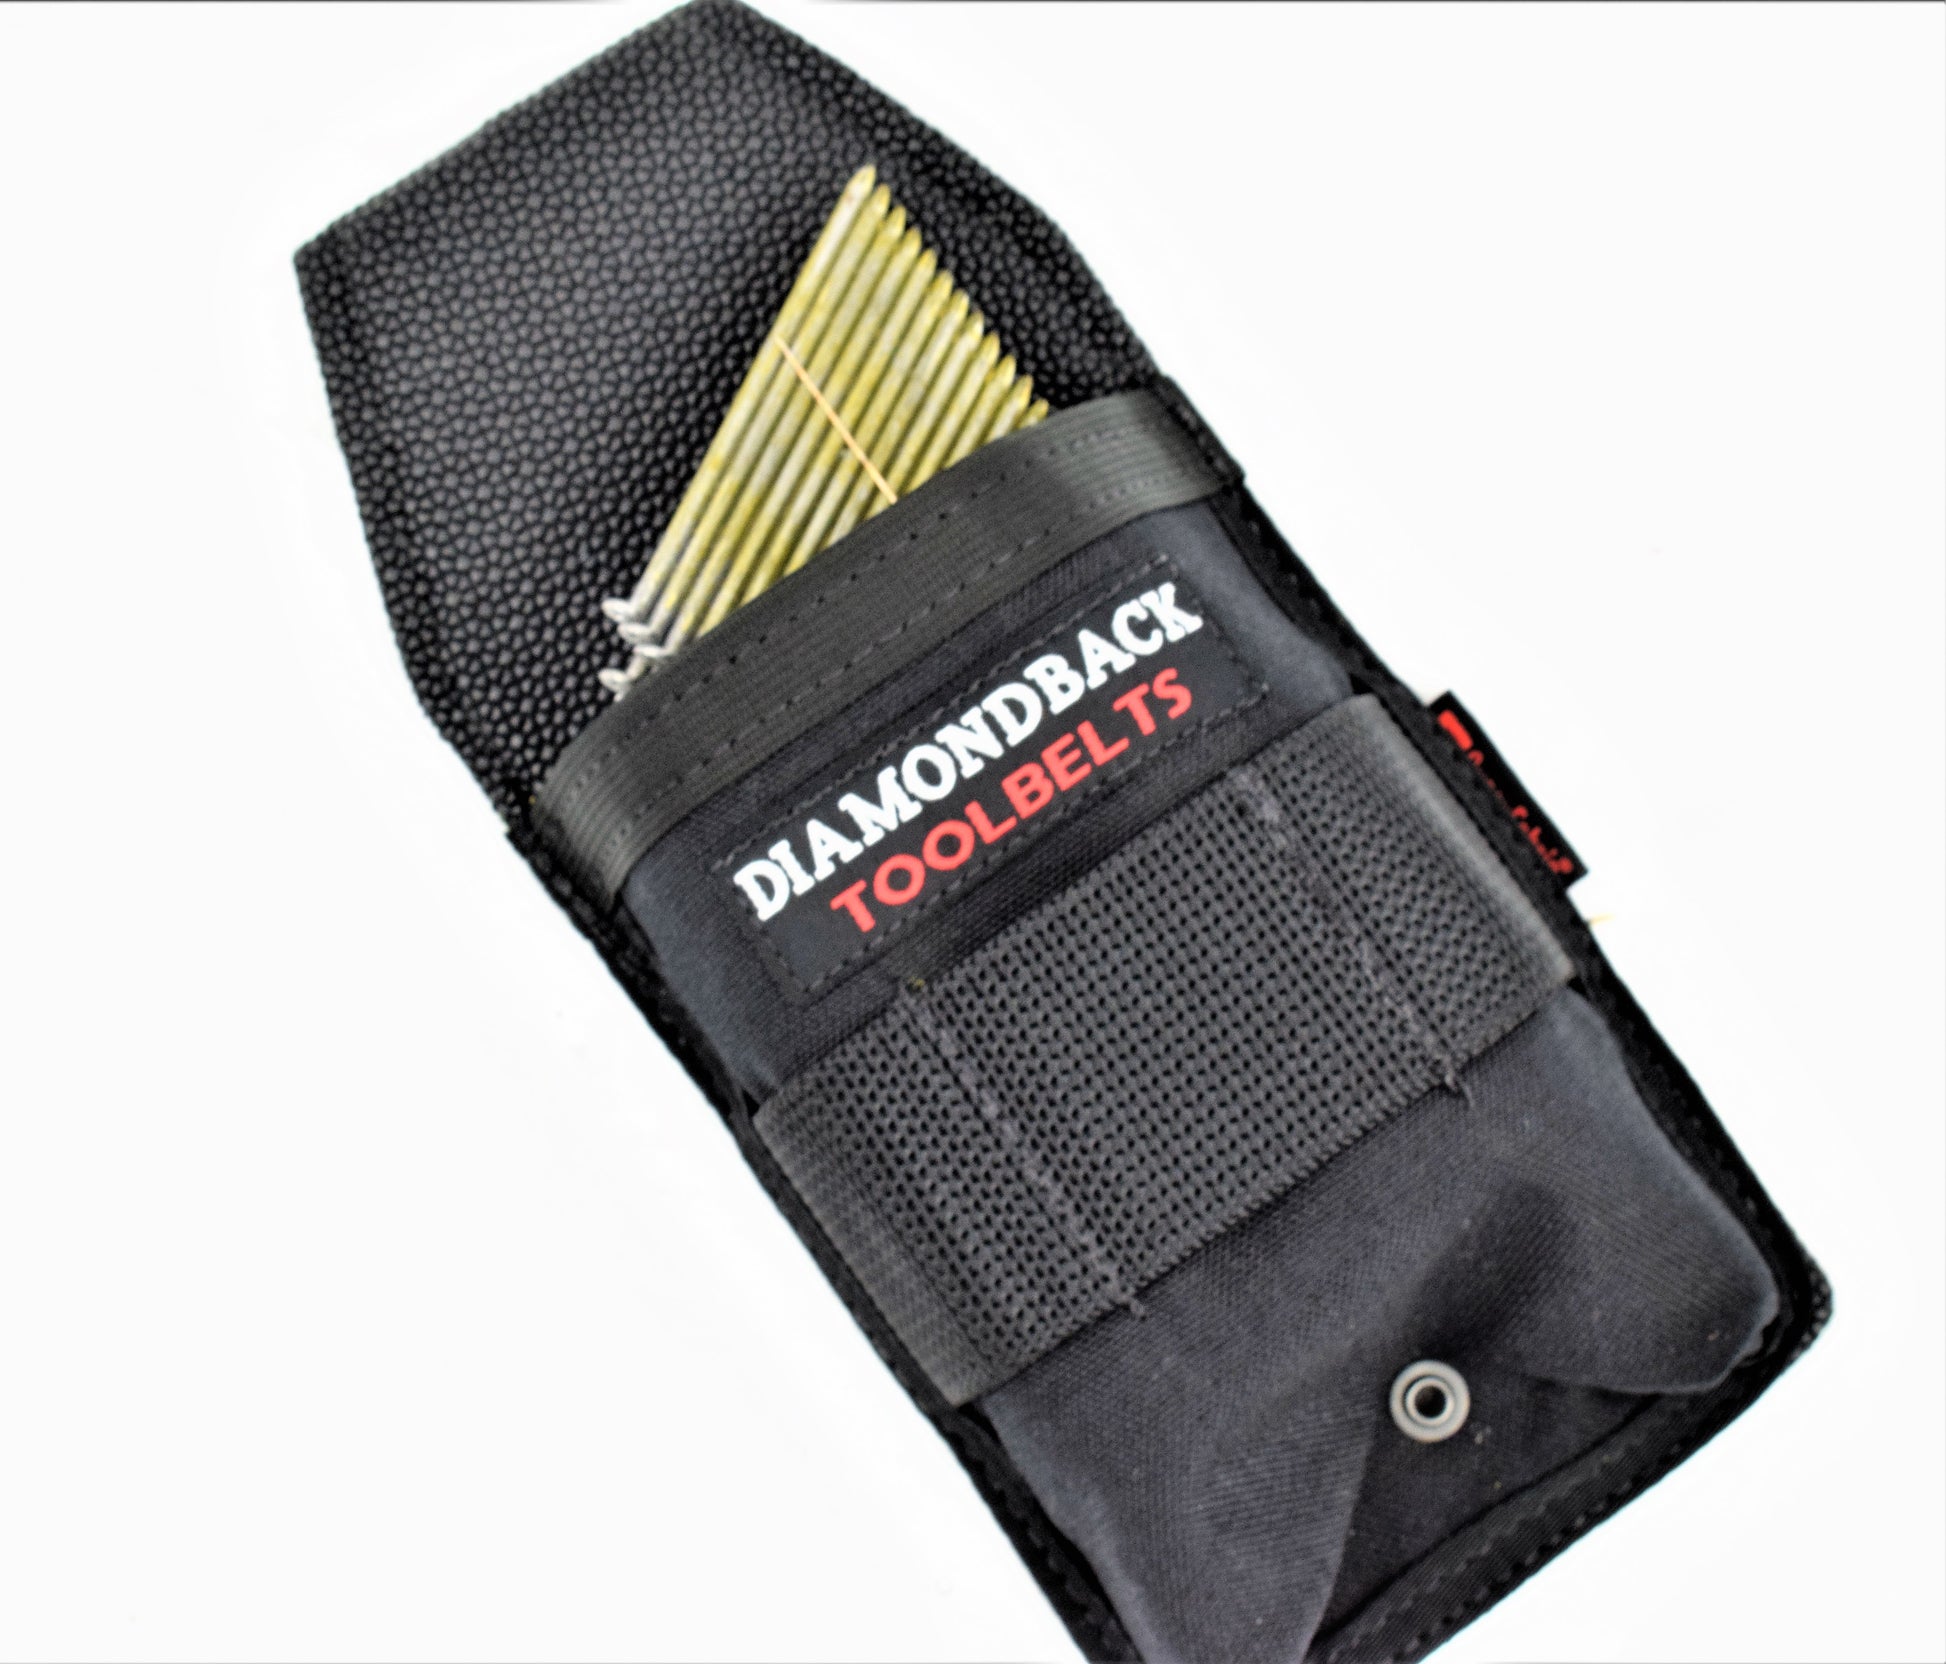 Strip Nail Pouch is available from Top Class Gears / SIG Tools 